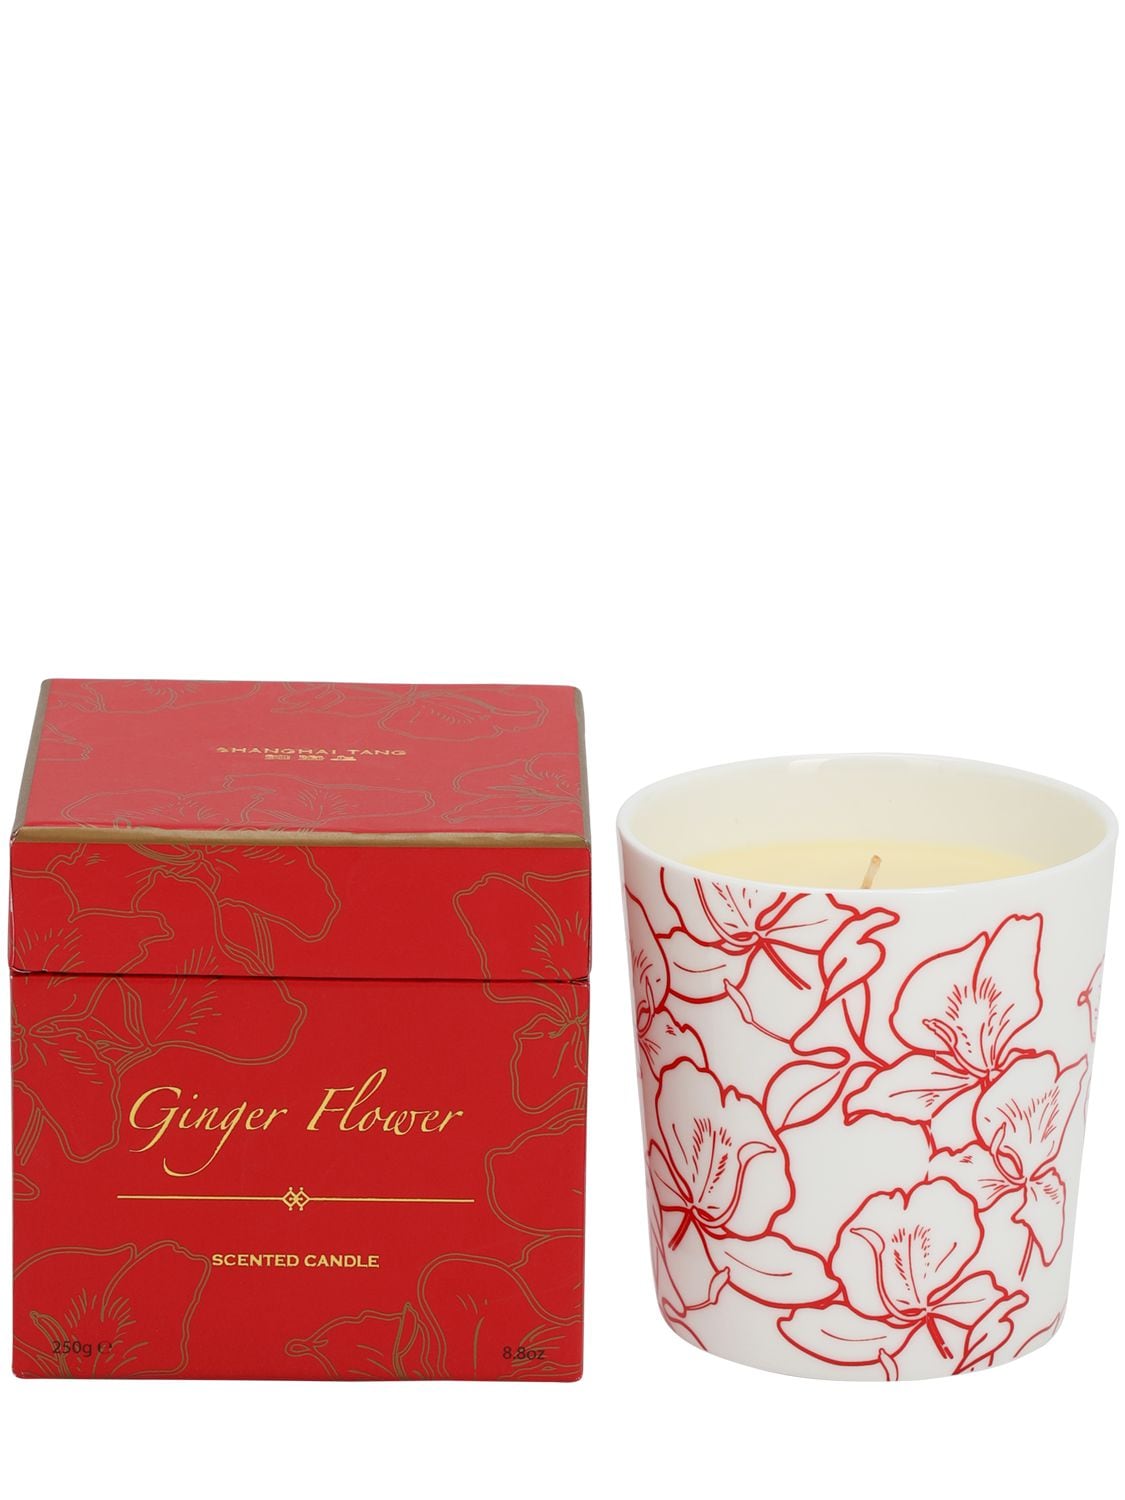 Shanghai Tang Ginger Flower Bone China Scented Candle In Red,white